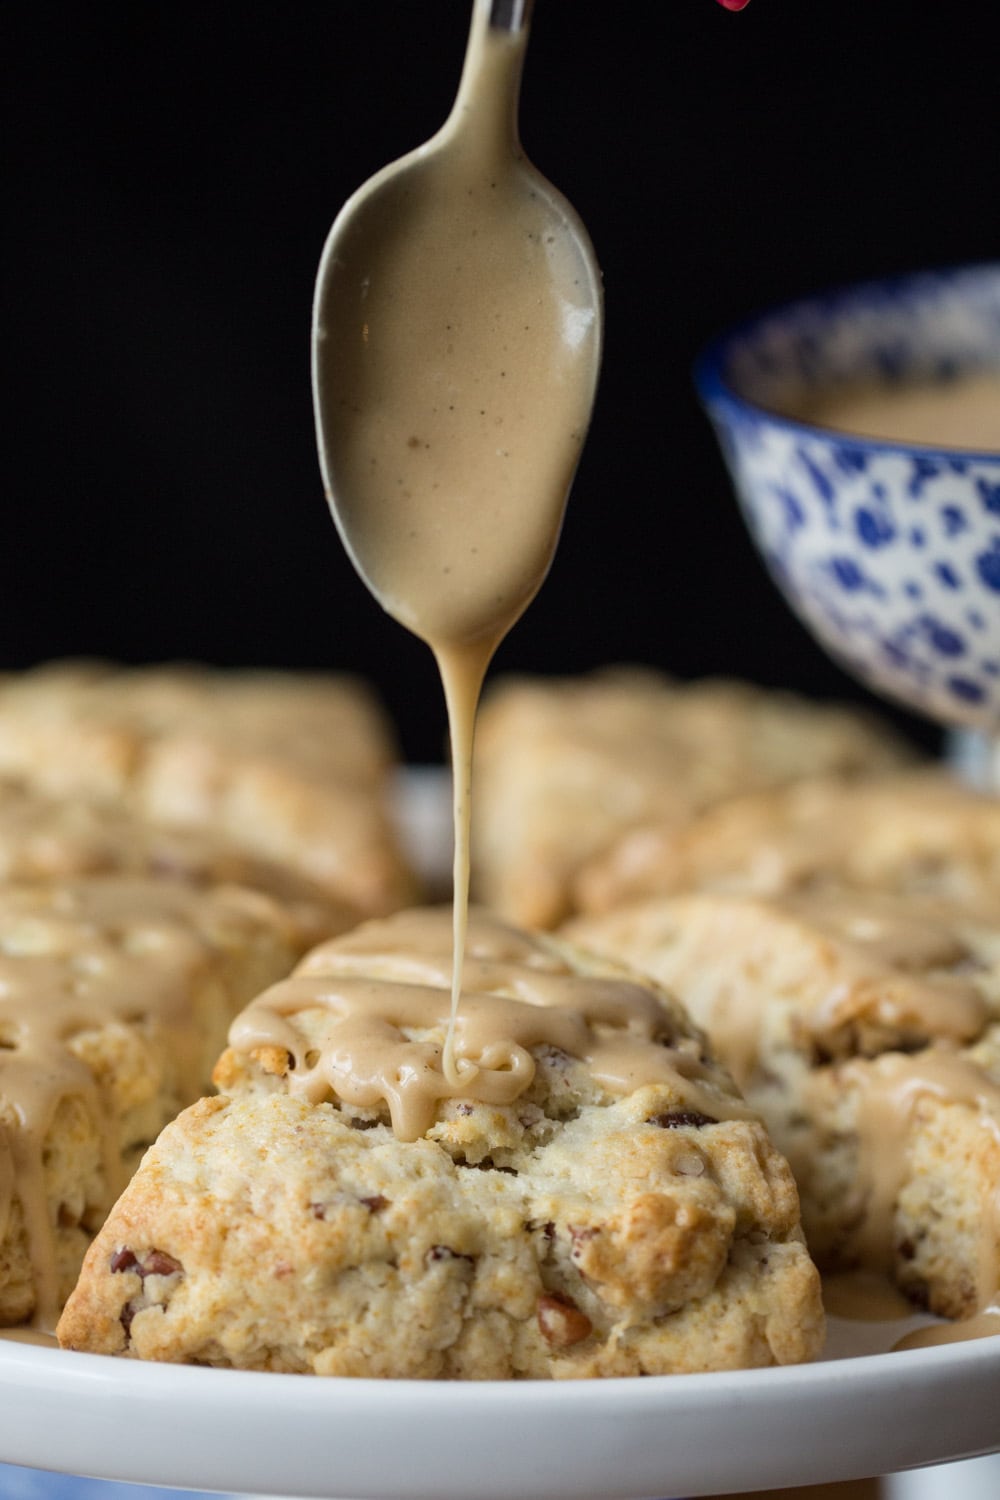 Vertical photo of a plate of Ridiculously Easy Maple Pecan Scones with the front scone being covered in maple glaze with a spoon.